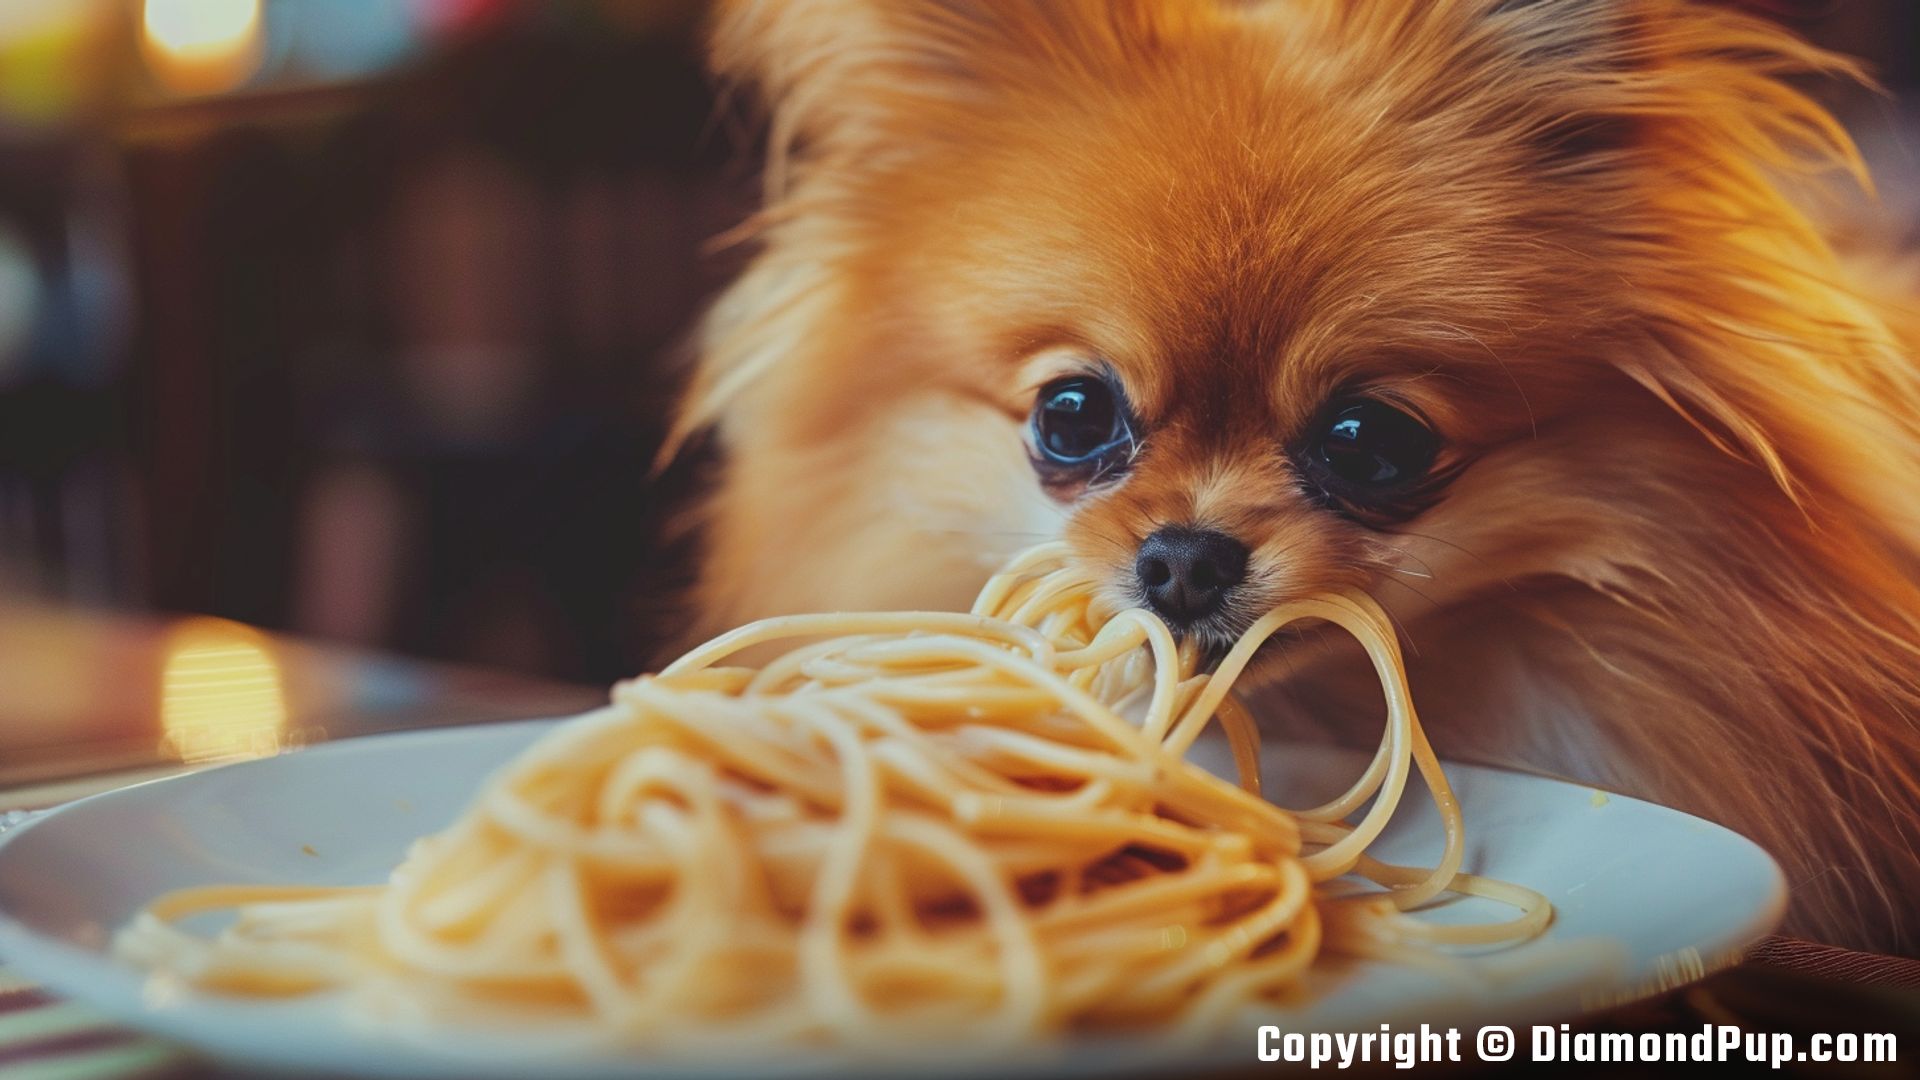 Photo of an Adorable Pomeranian Snacking on Pasta